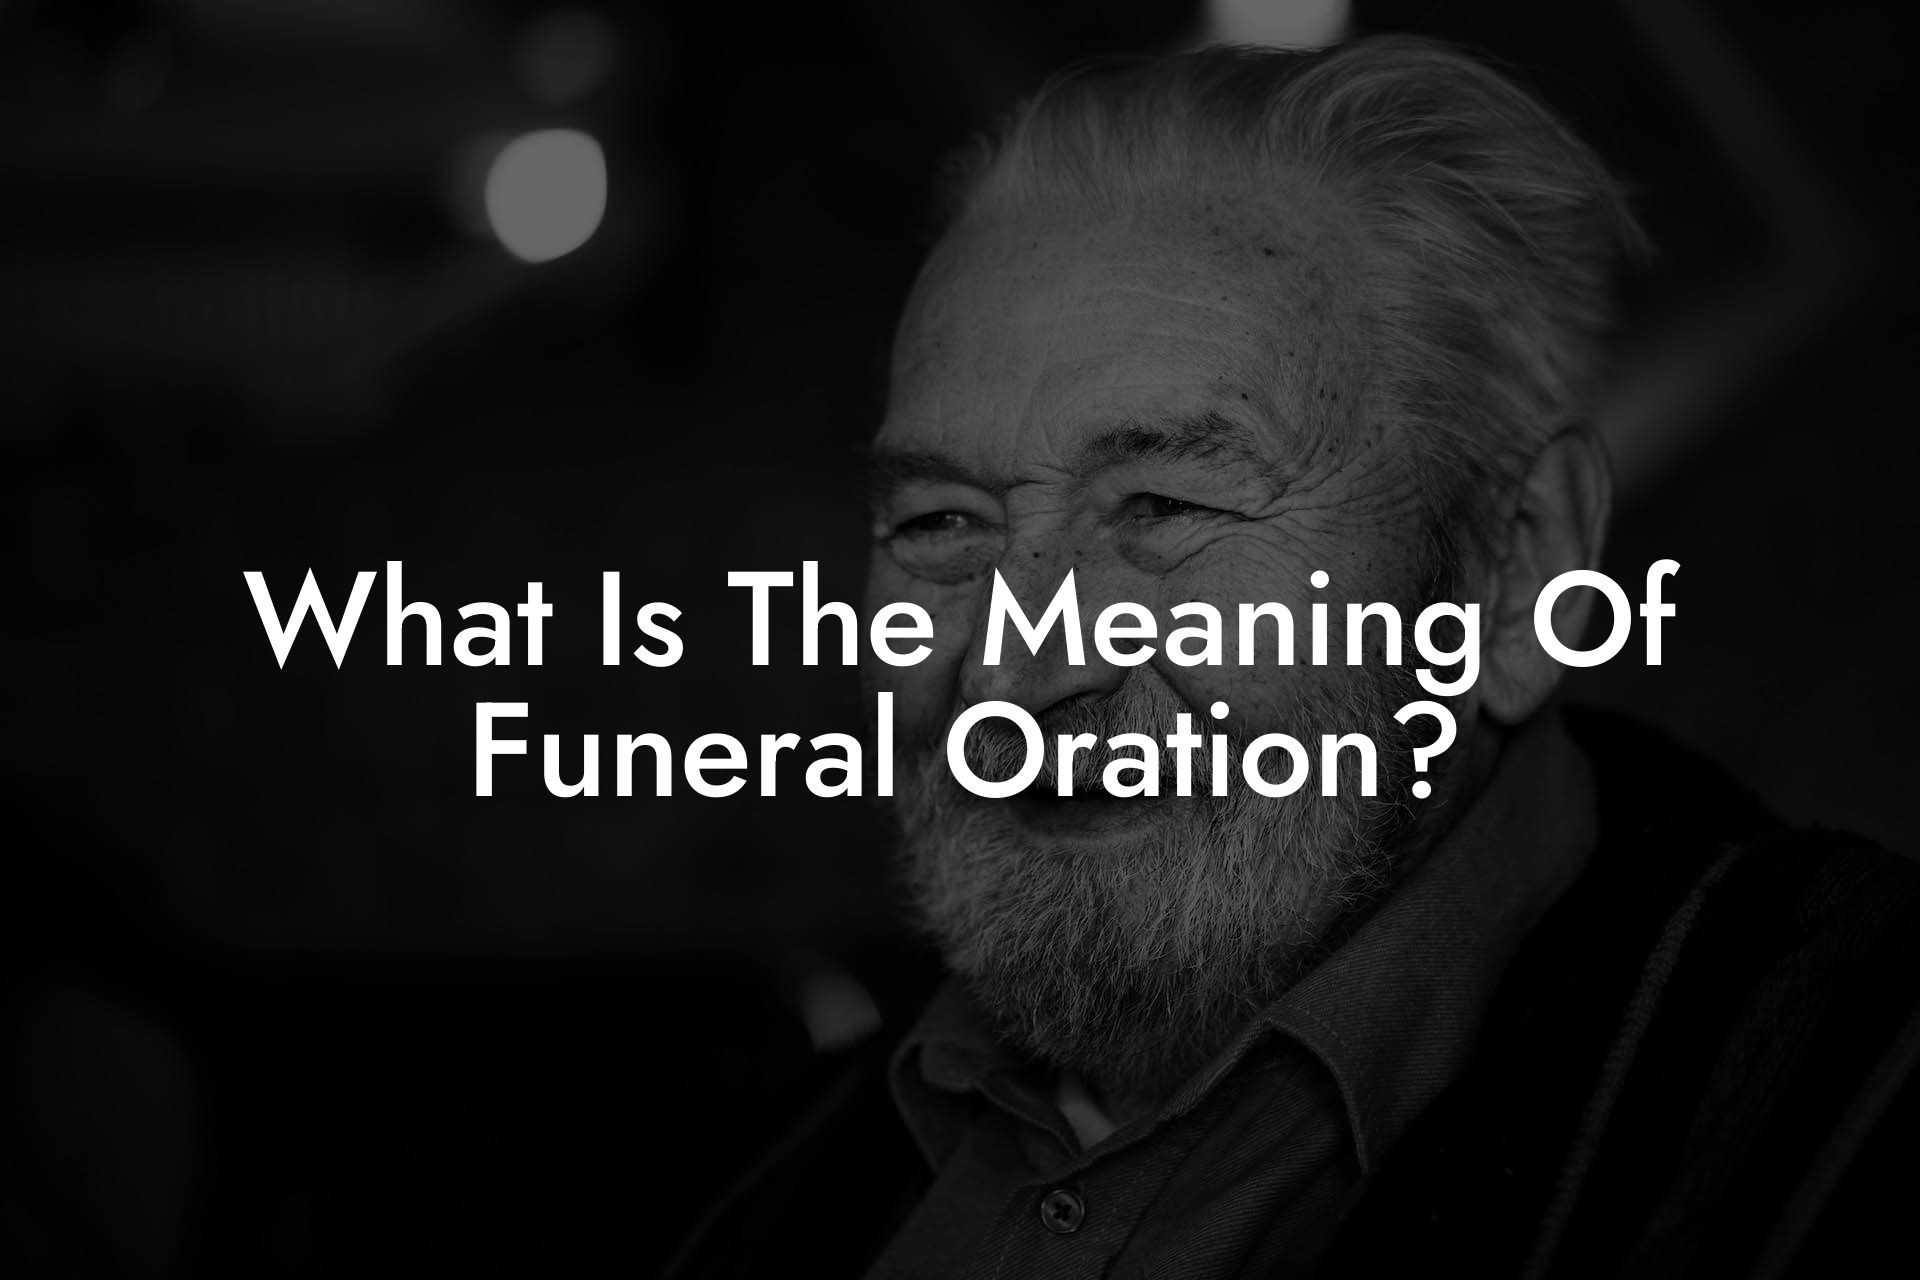 What Is The Meaning Of Funeral Oration?